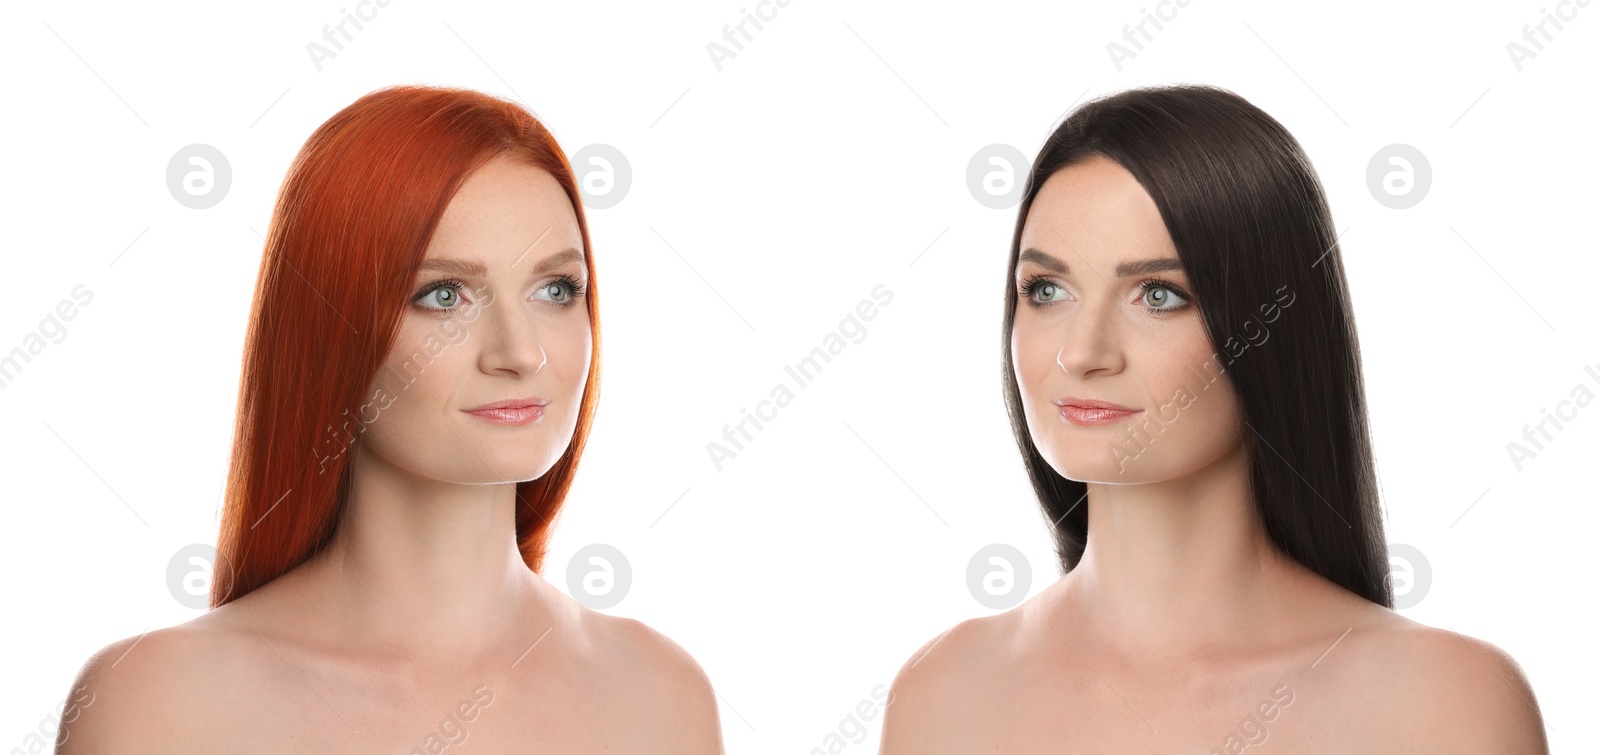 Image of Beautiful young woman before and after hair dyeing on white background, collage. Banner design